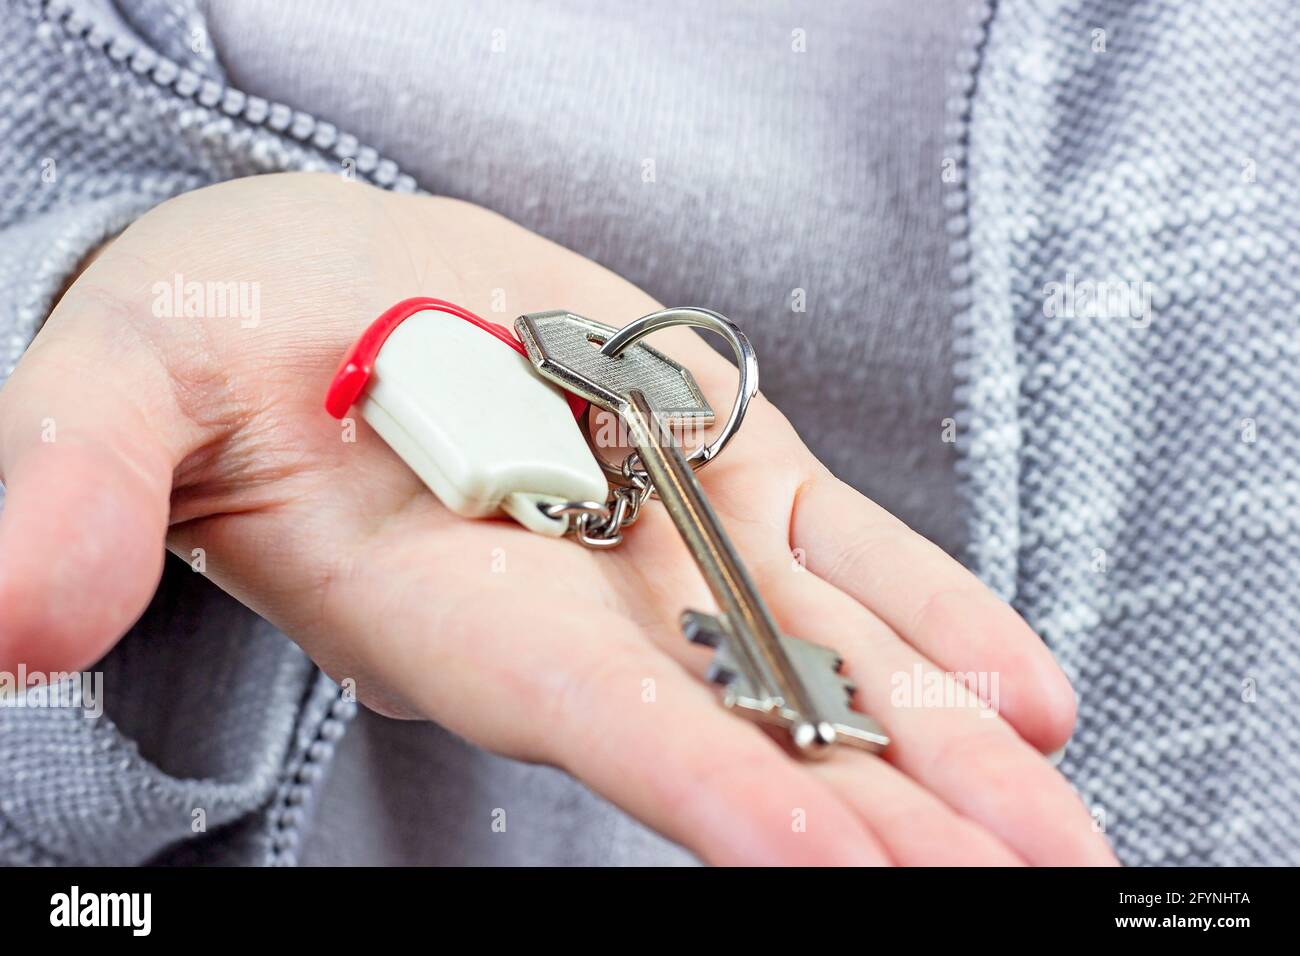 Woman hands holding the keychain with the keys and small house key ring close up. Apartment renter, real estate ownership, property purchase concept. Stock Photo